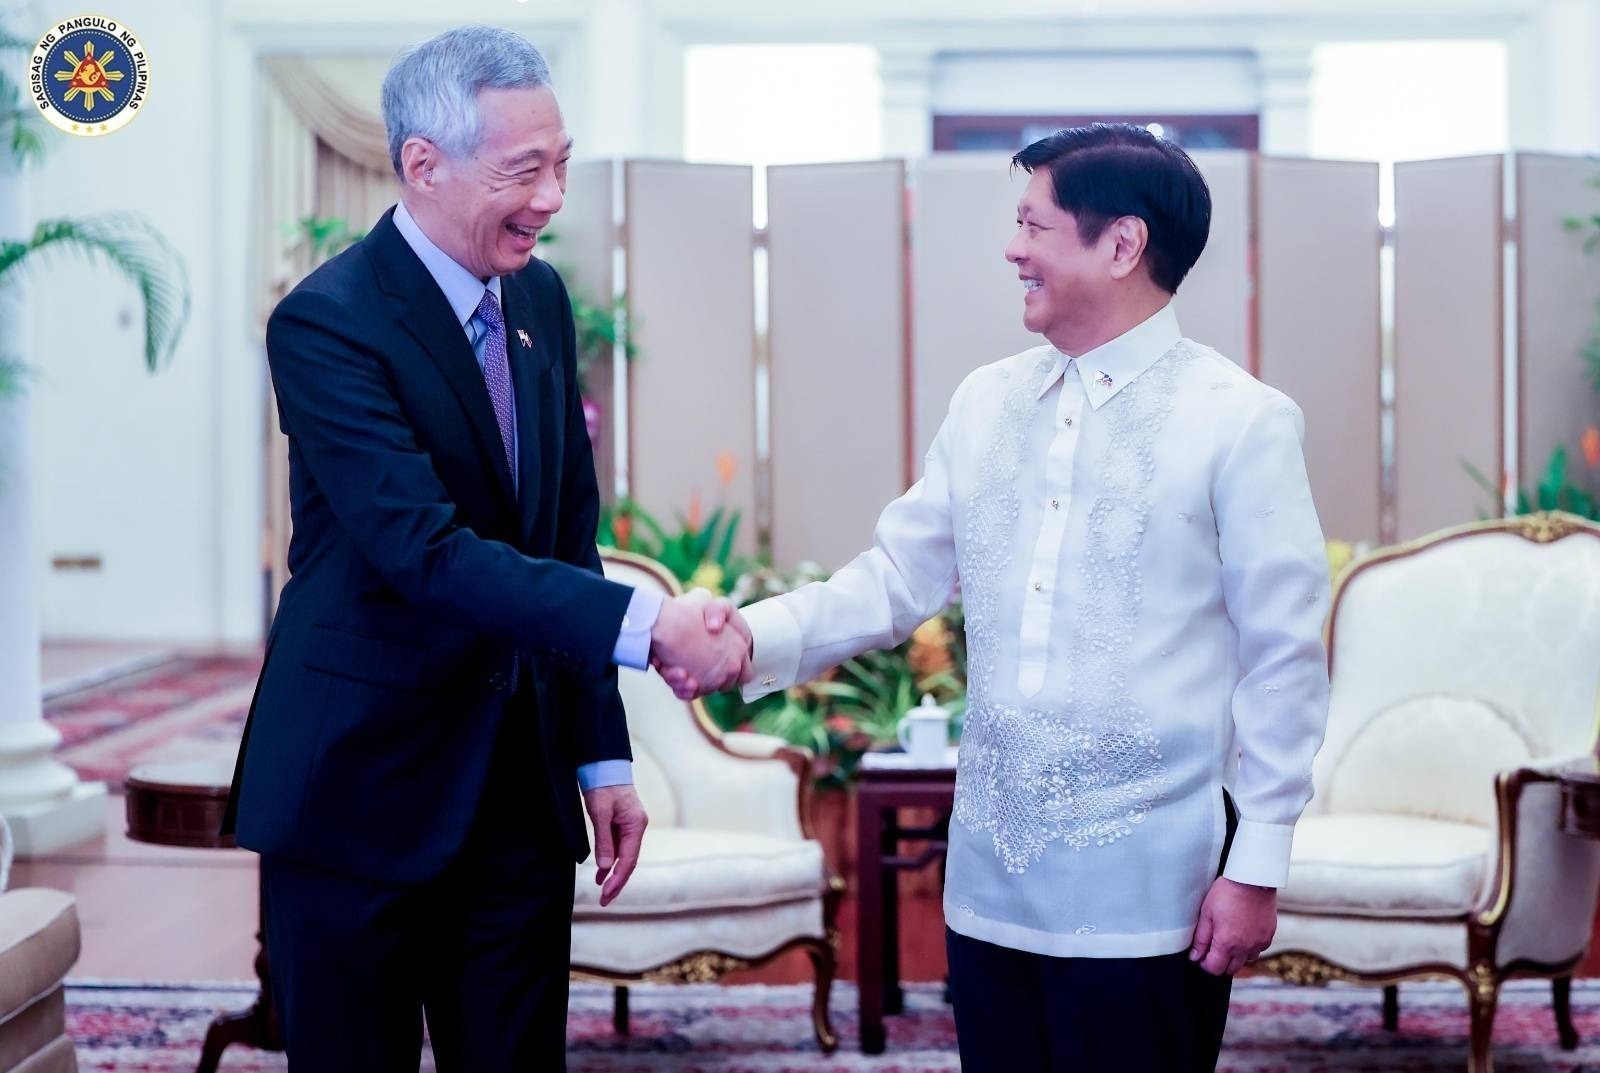 Singapore Prime Minister Lee Hsien Loong and President Ferdinand Marcos Jr.